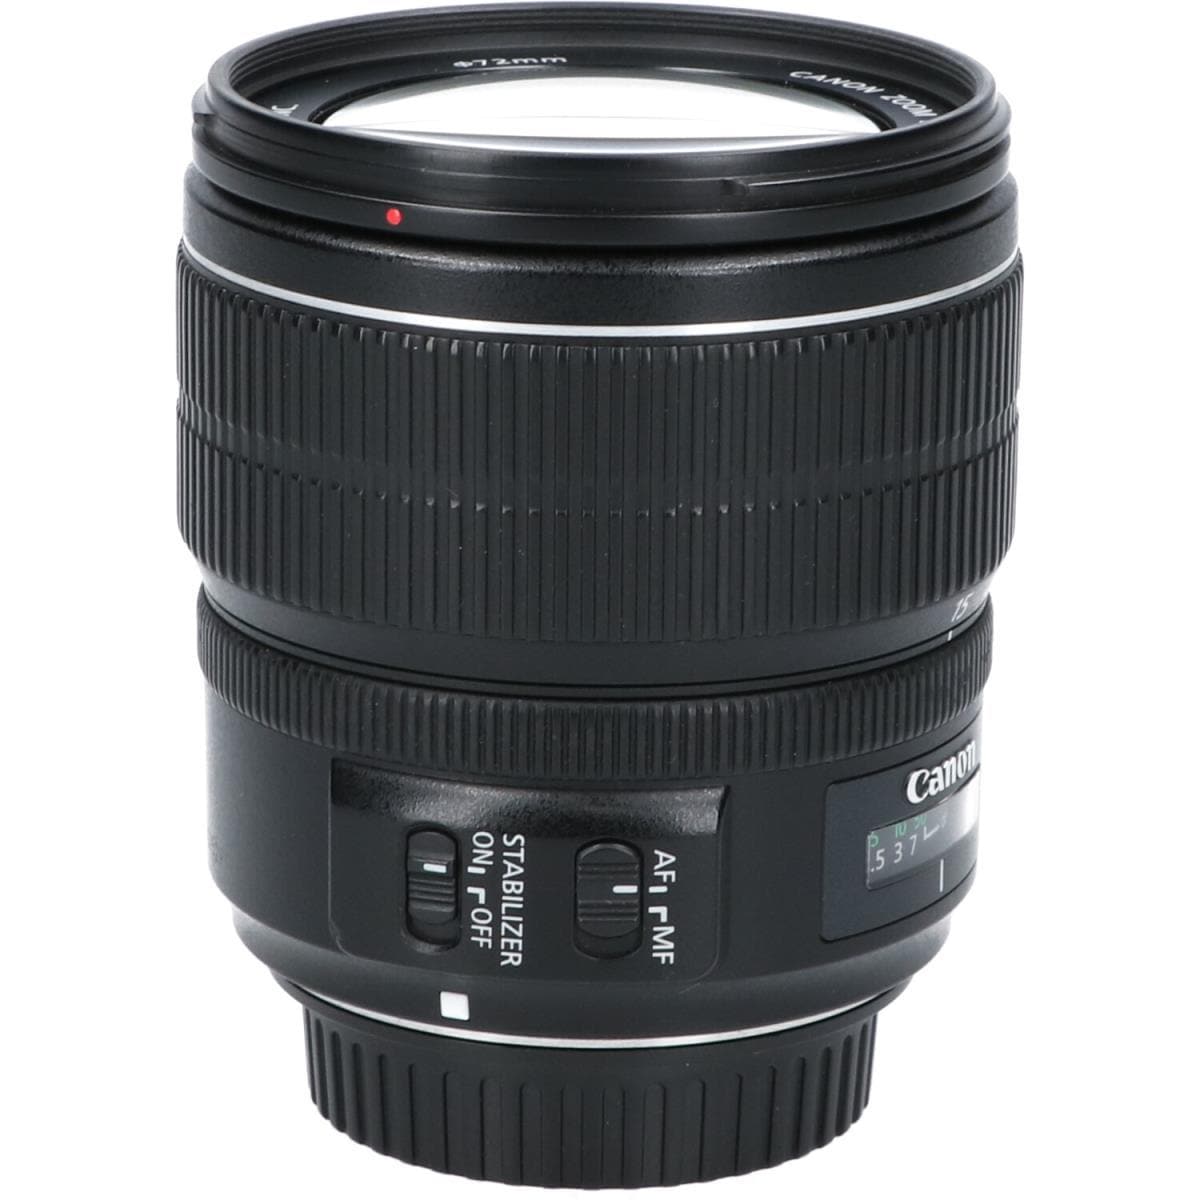 CANON EF-S15-85mm F3.5-5.6 IS USM